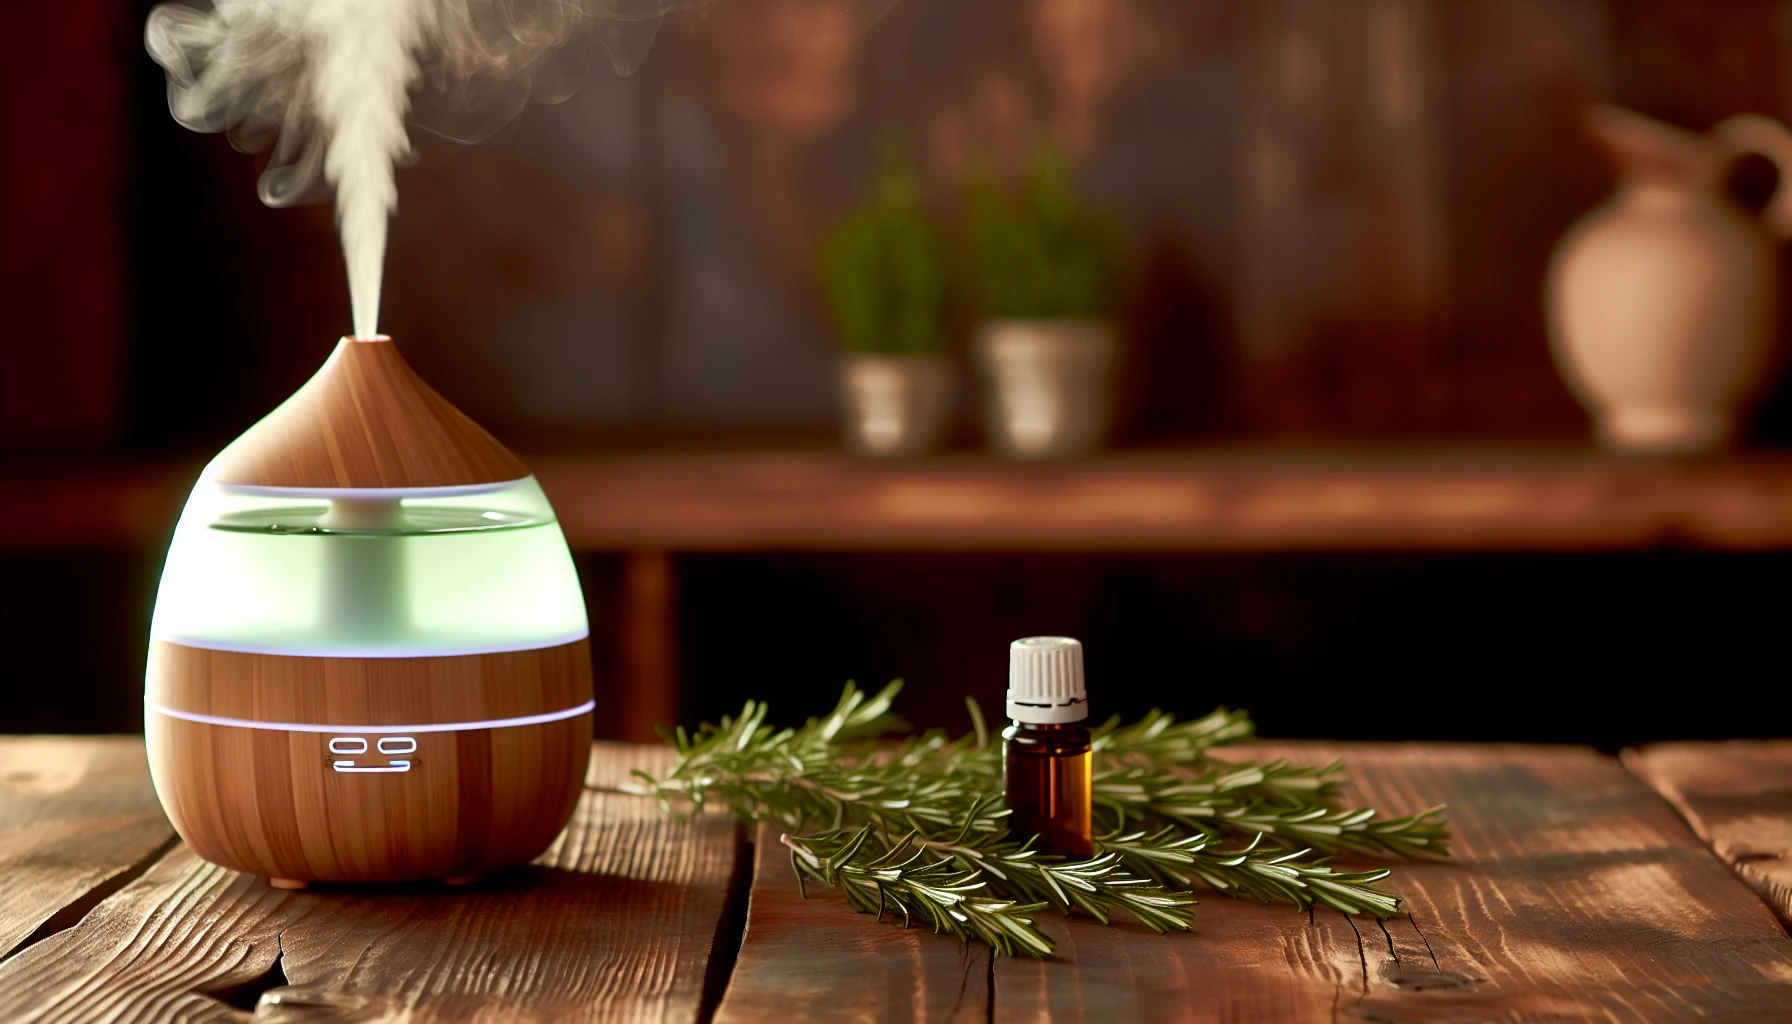 Aromatherapy diffuser emitting mist with rosemary oil for cognitive enhancement